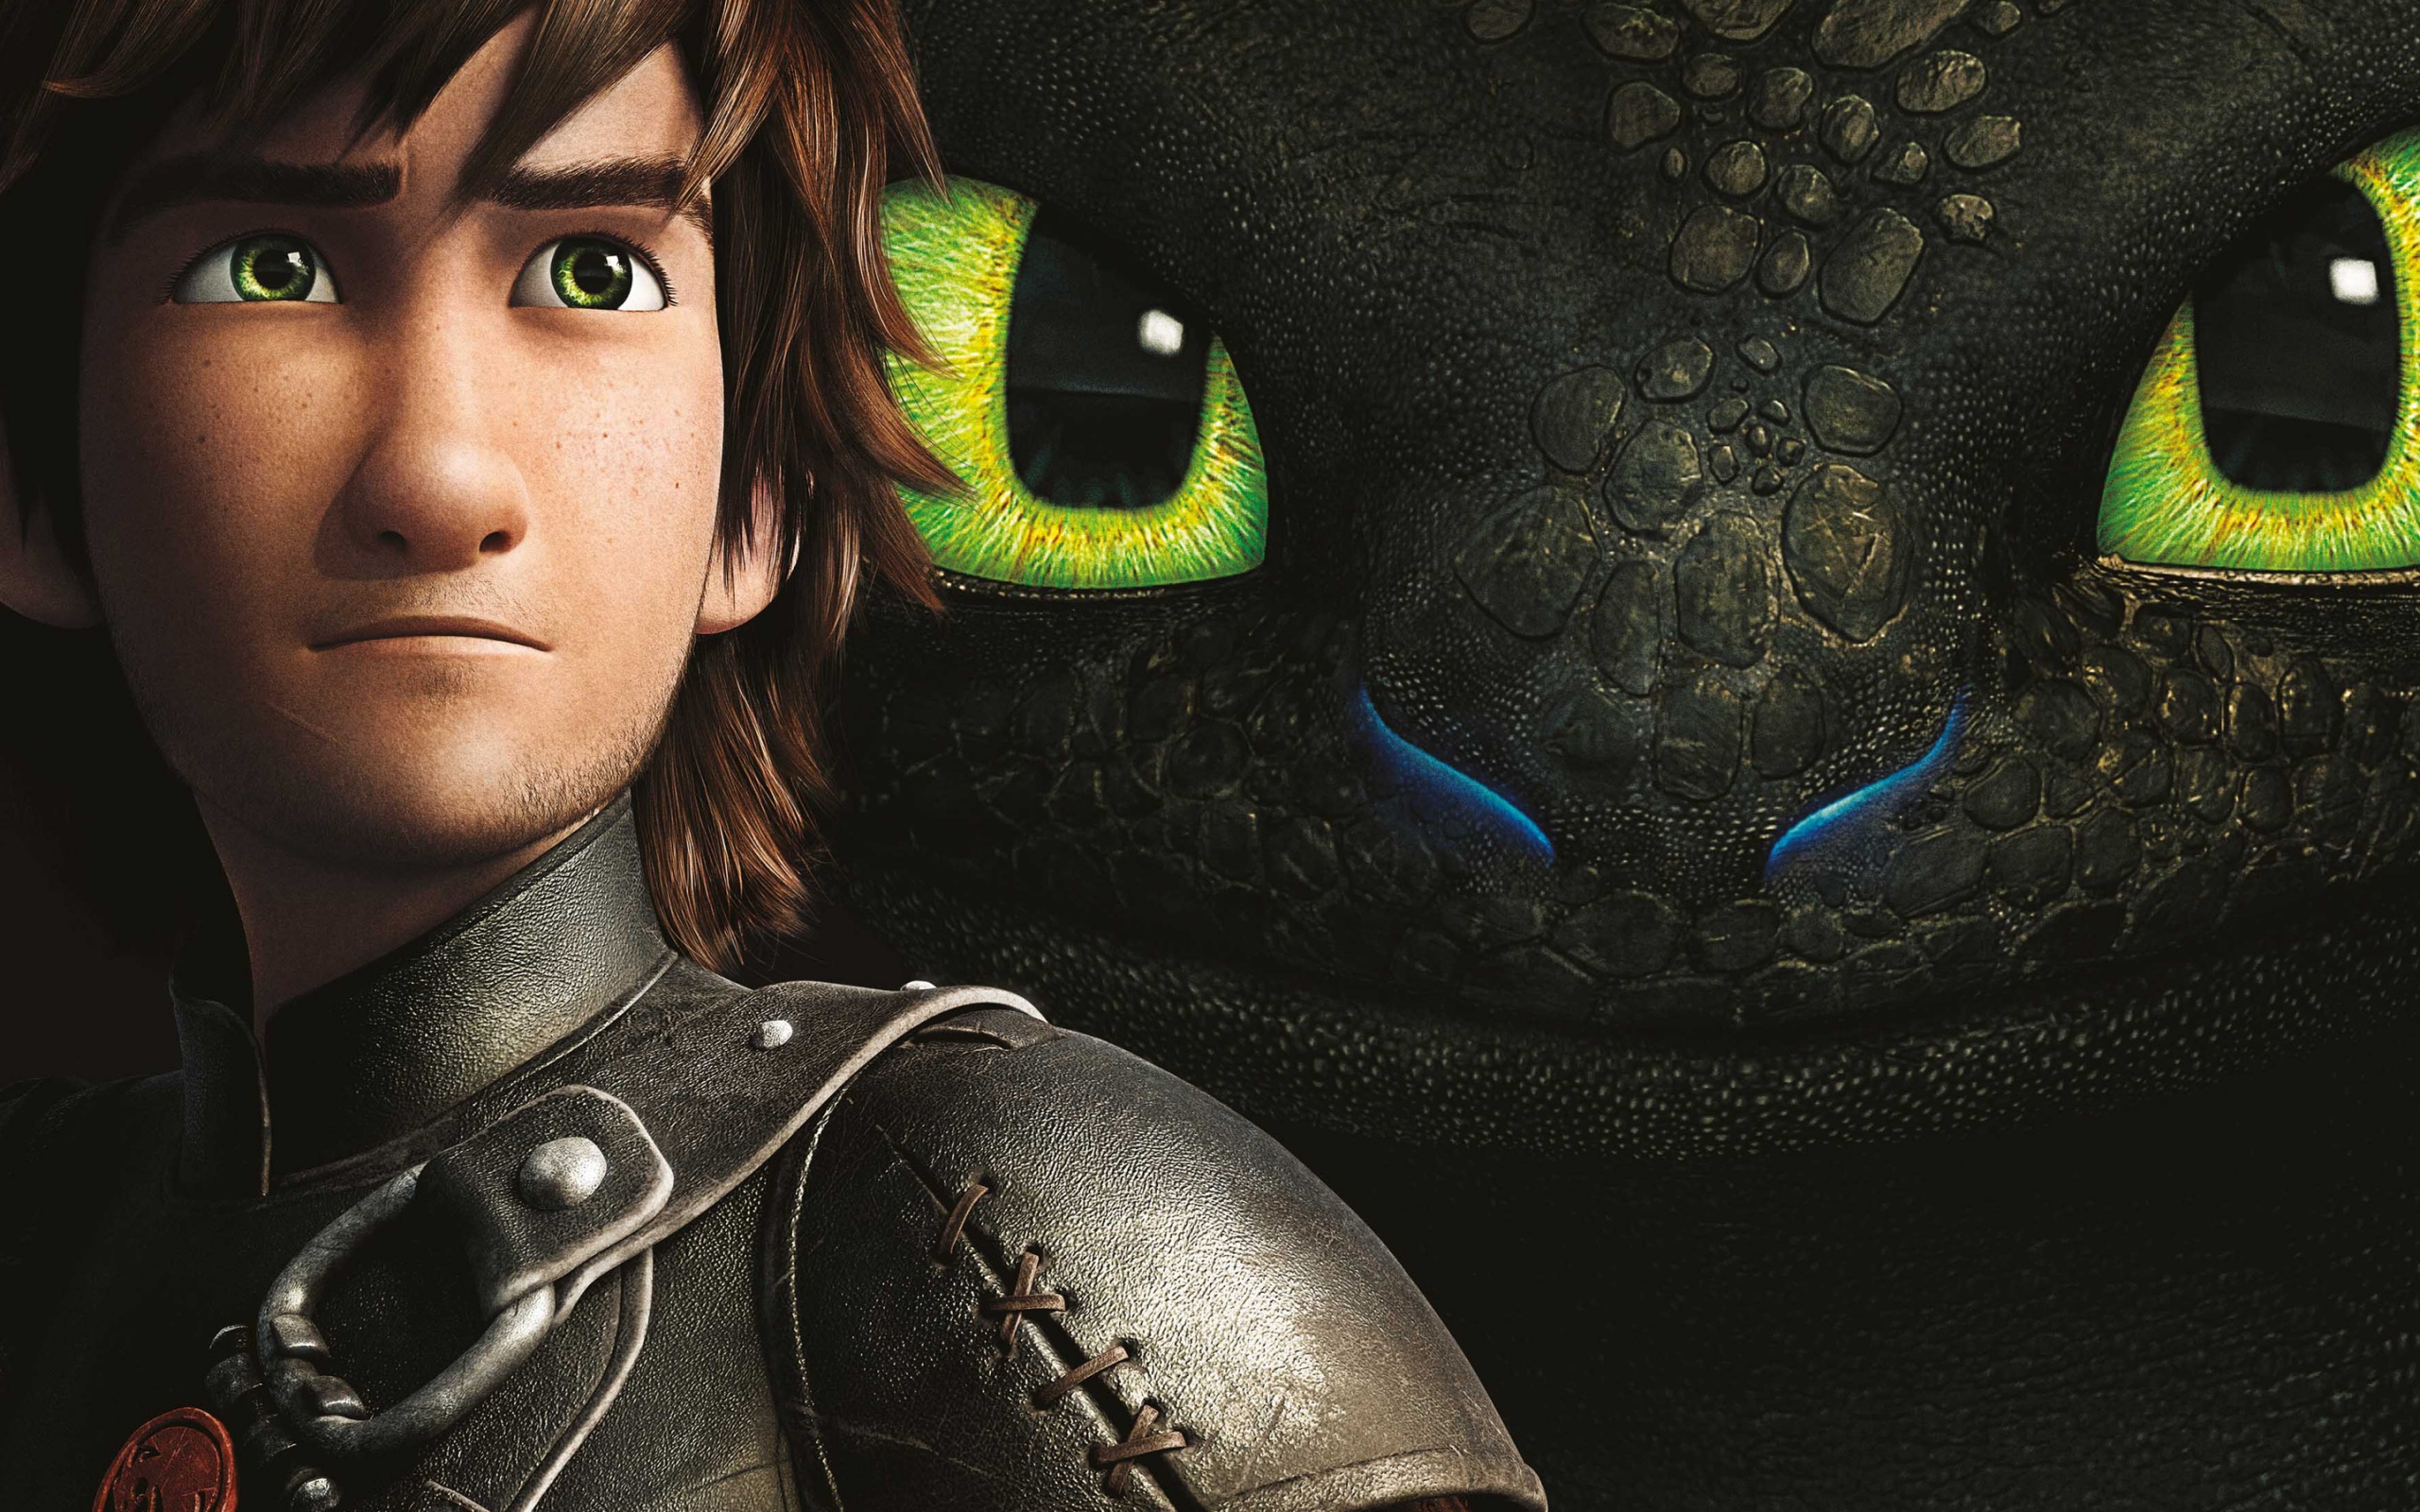 how to train your dragon iphone wallpaper